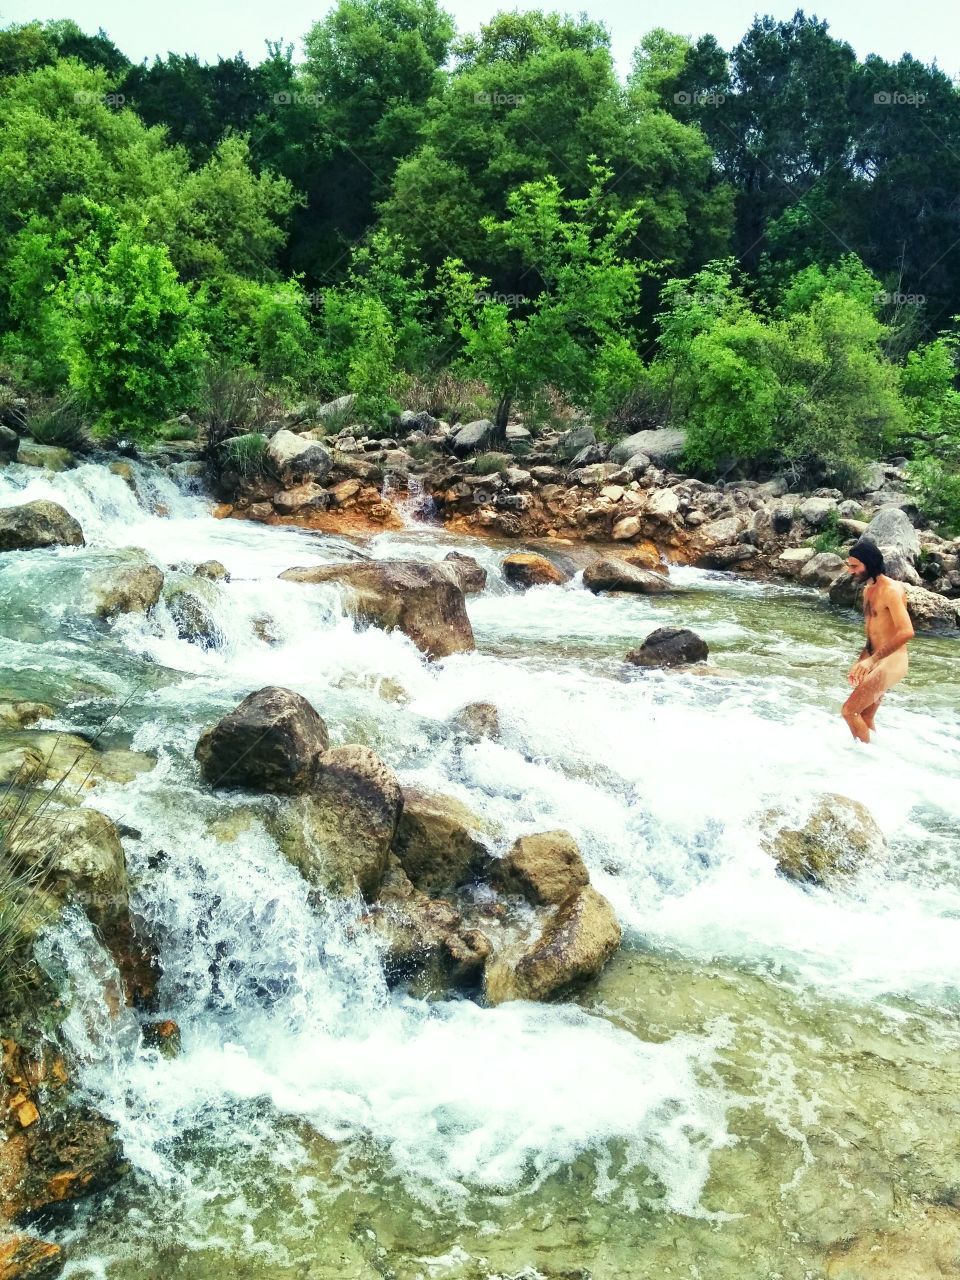 man in water. my love swimming at the greenbelt in ATX